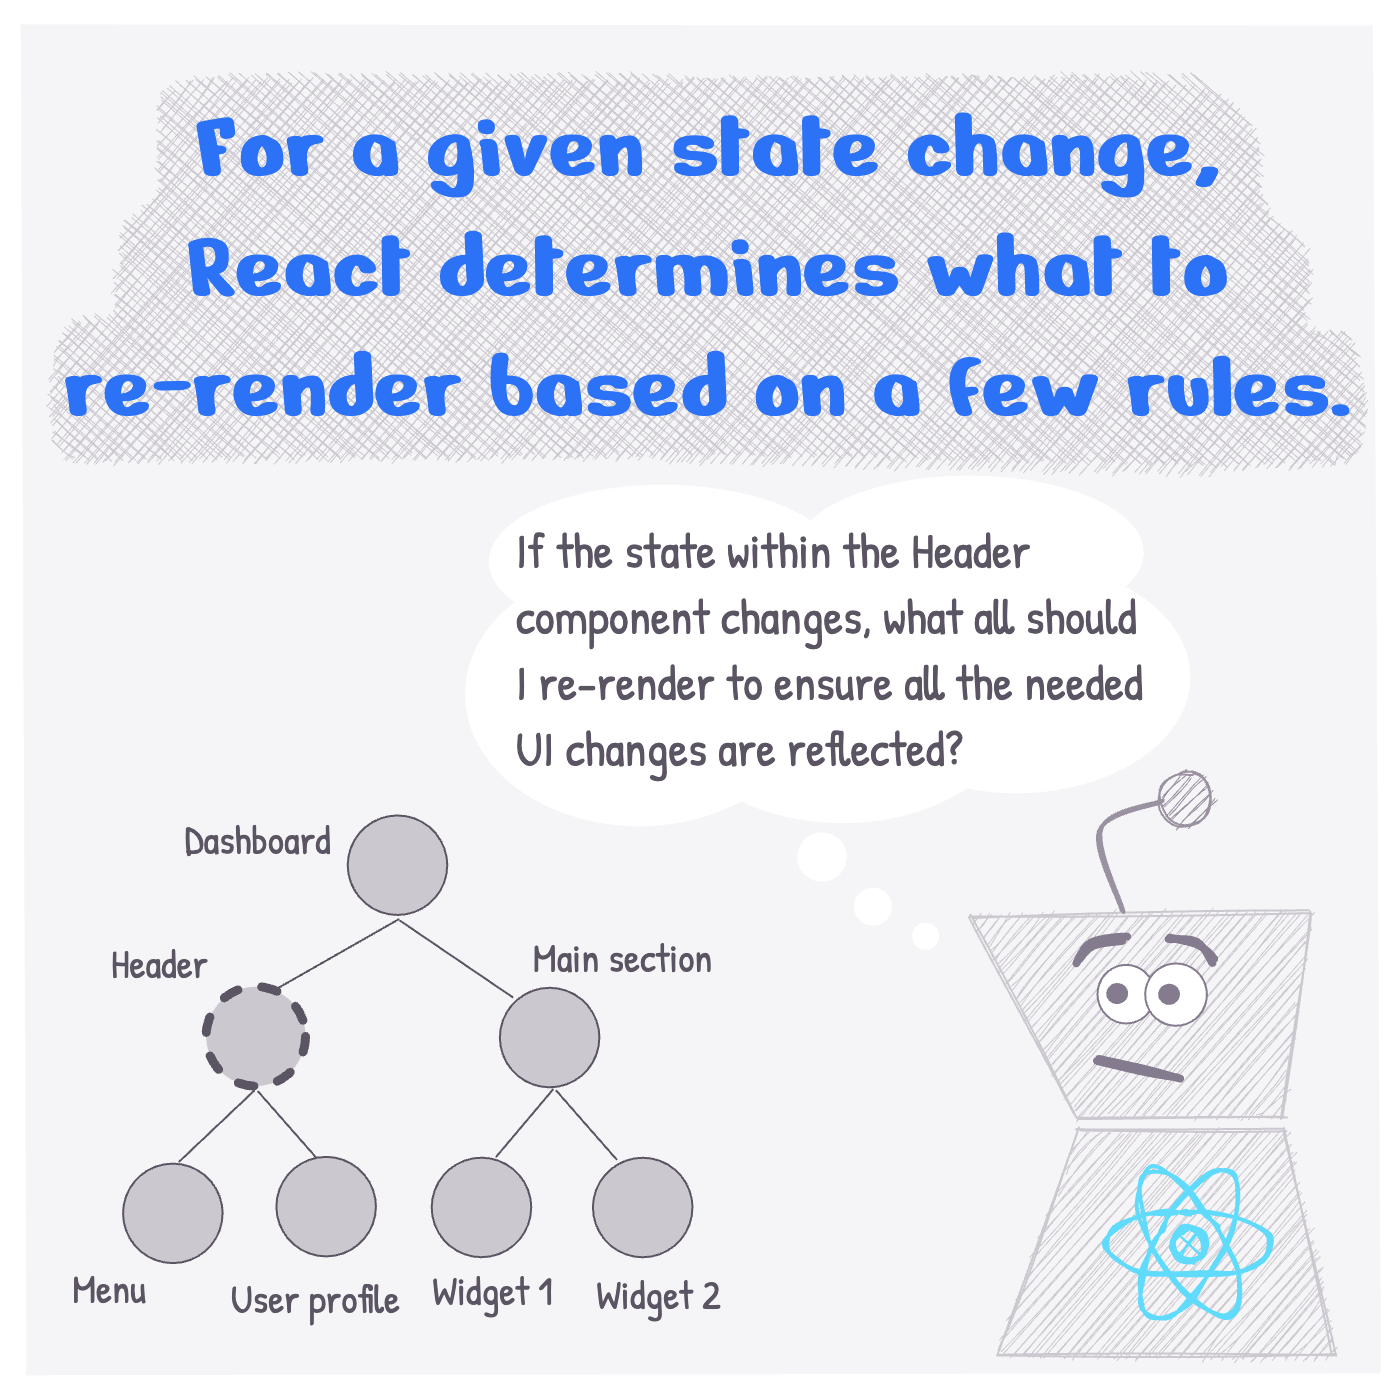 For a given state-change, React determines what to re-render based on a few rules.